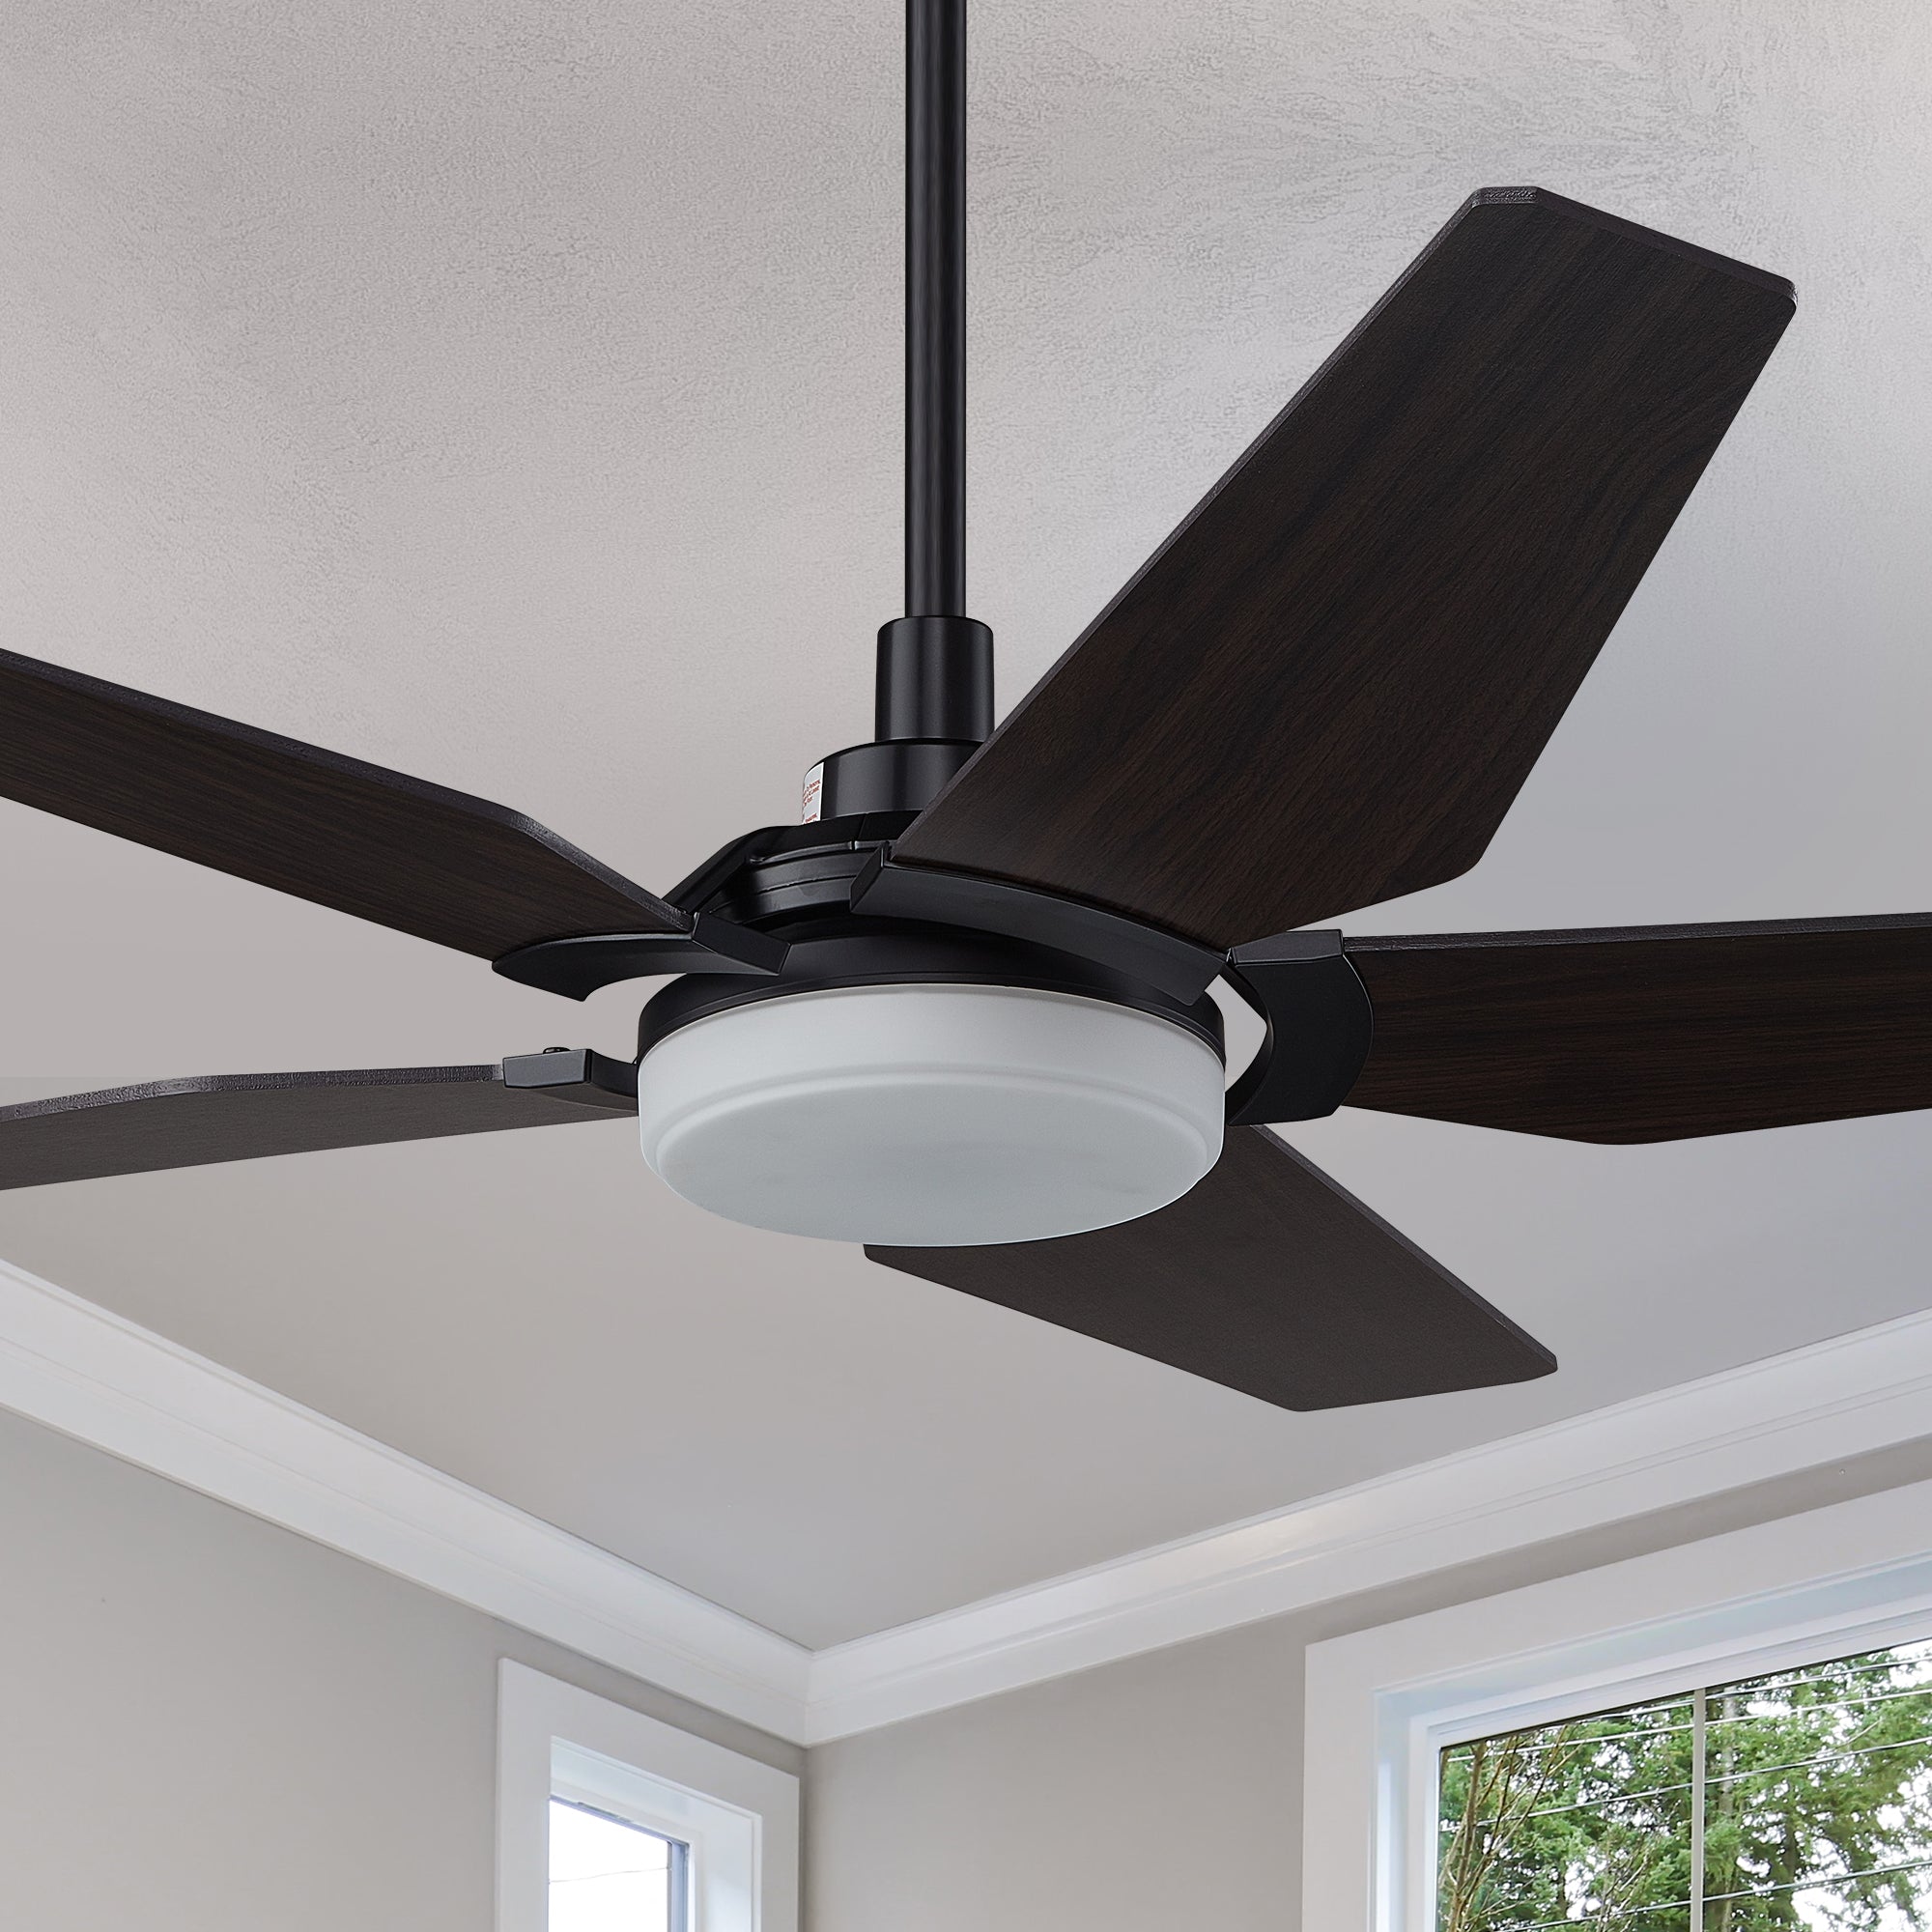 Voyager 52 inch Outdoor/Indoor Smart WiFi Ceiling Fan with LED Light – 